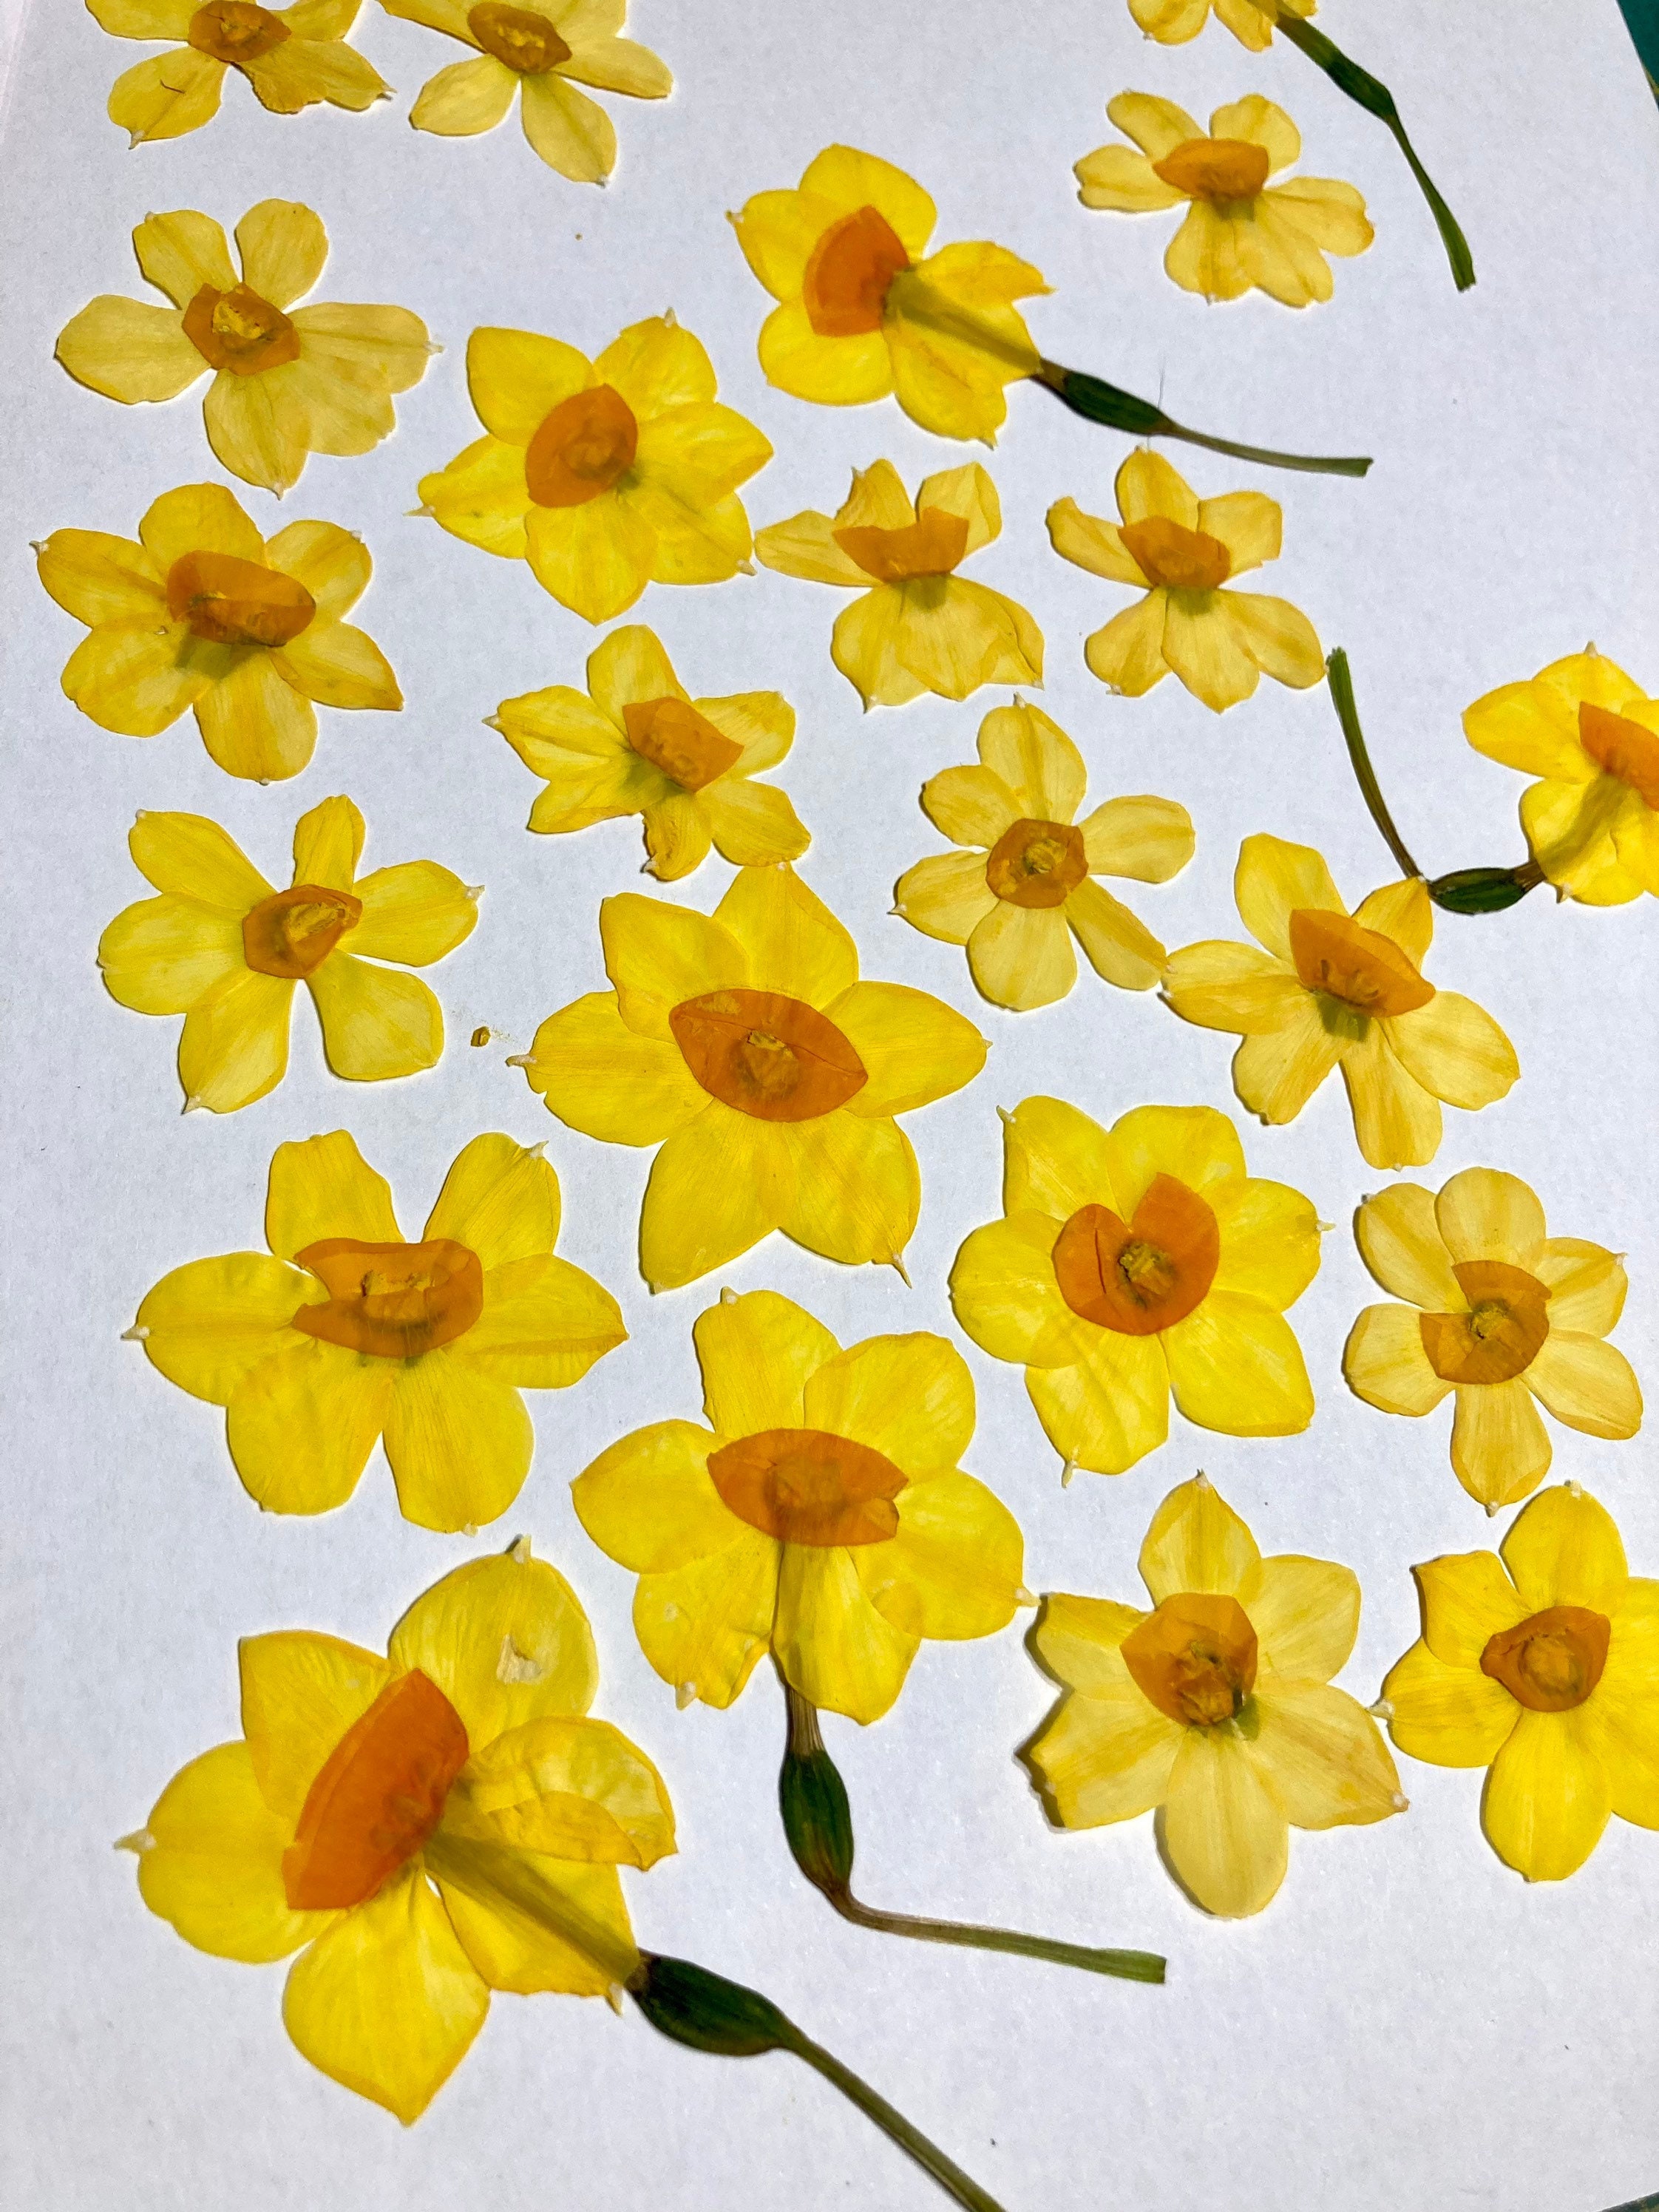 Pomeat 18Pcs Real Daffodil Bunches Dried Flowers Pressed Flowers DIY Preserved Flower Decorations 